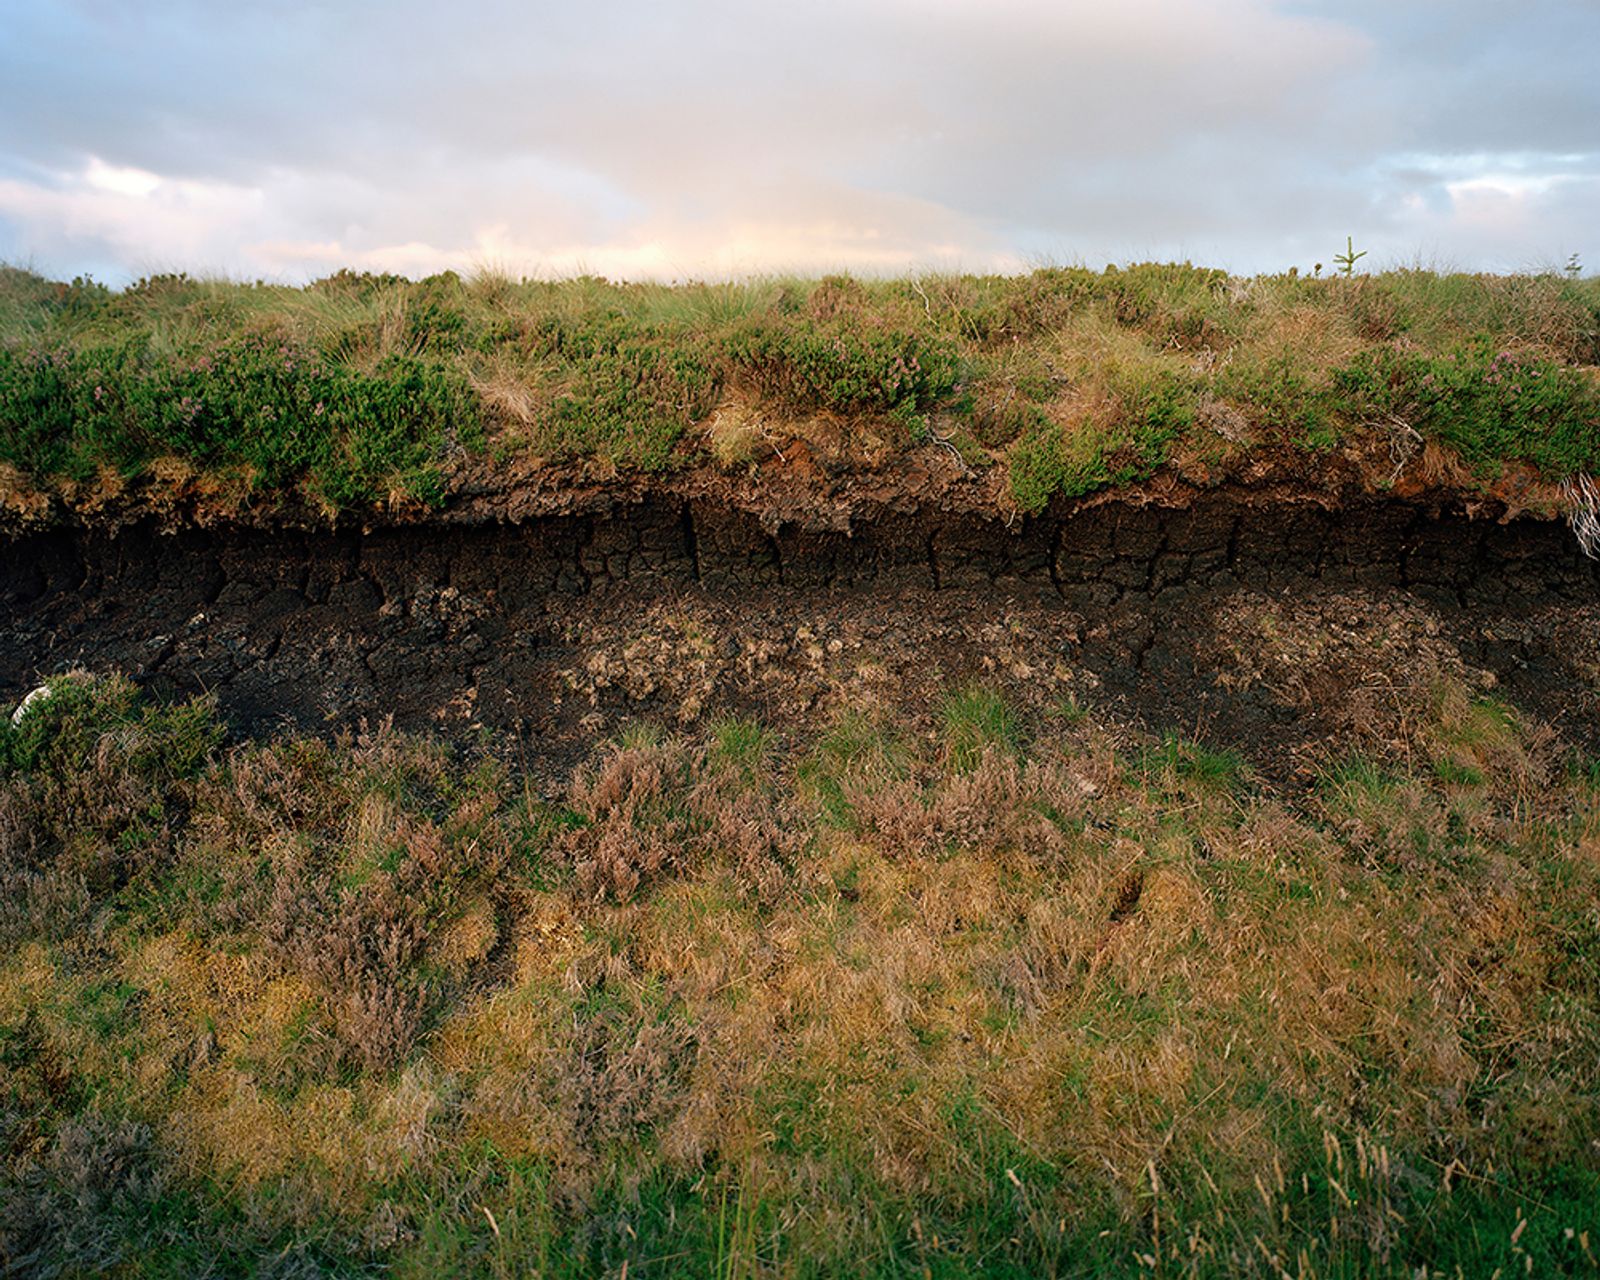 © Sophie Gerrard - Peat cross section, from the series 'The Flows'